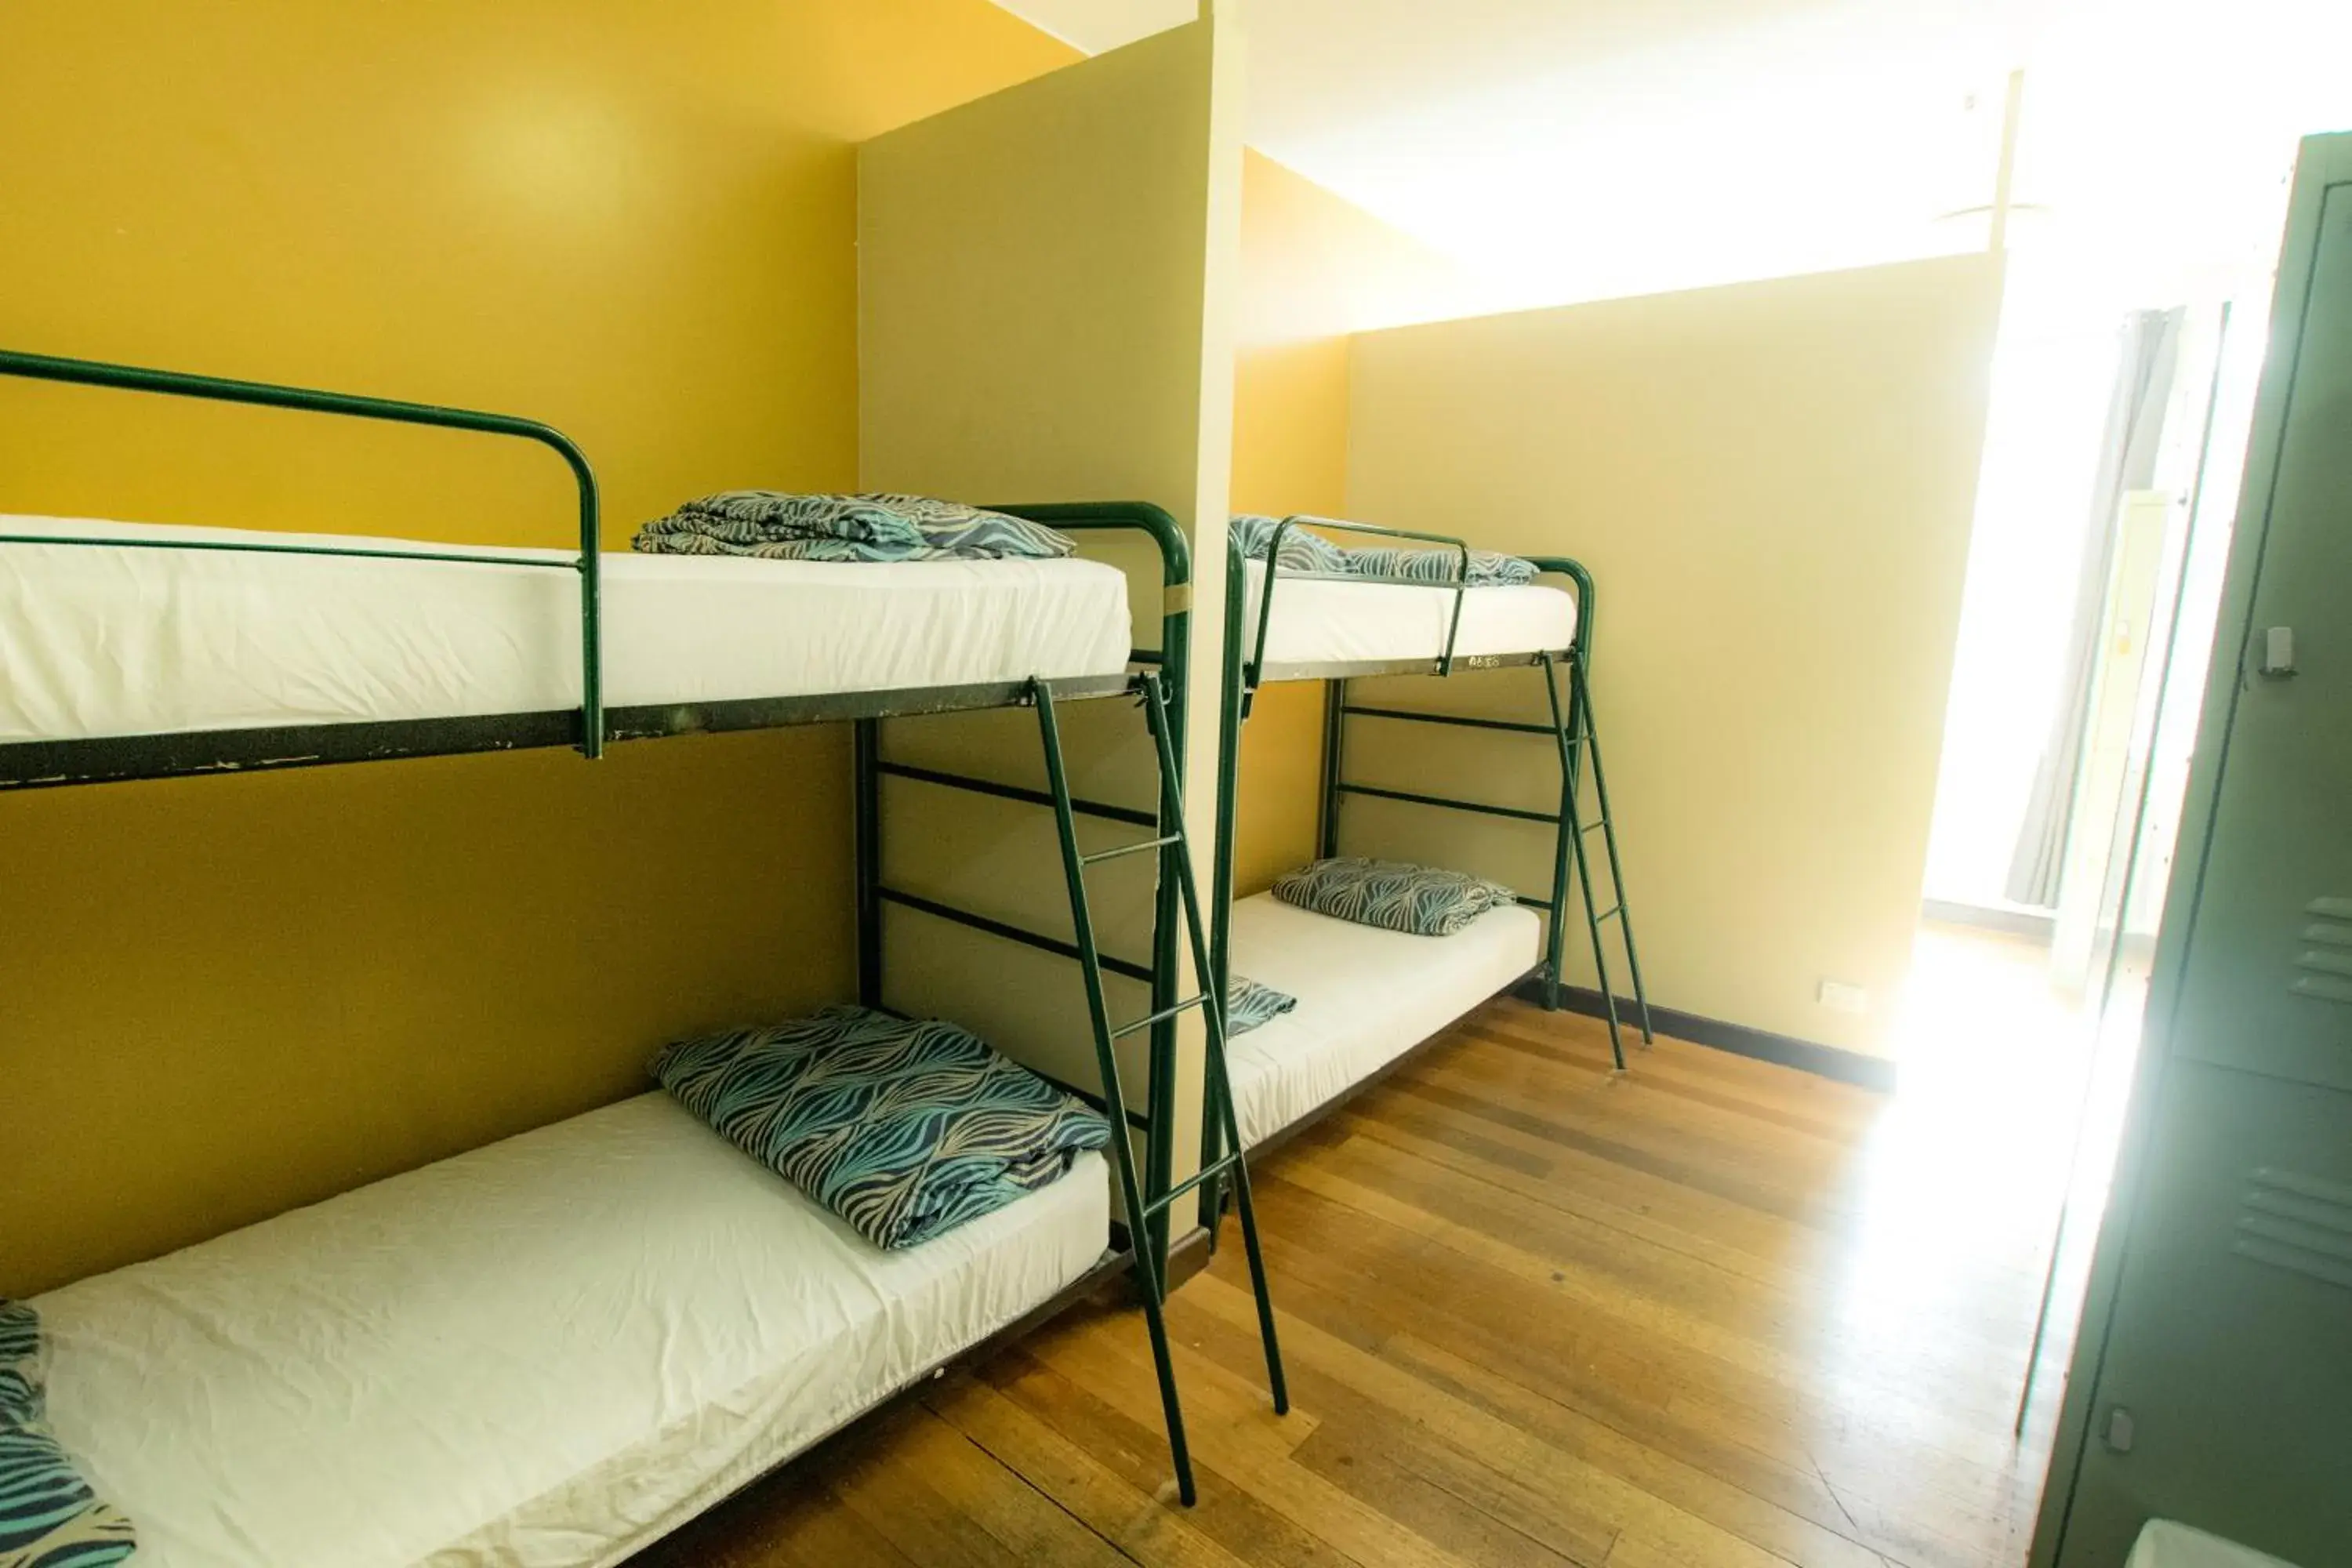 Bunk Bed in Melbourne City Backpackers